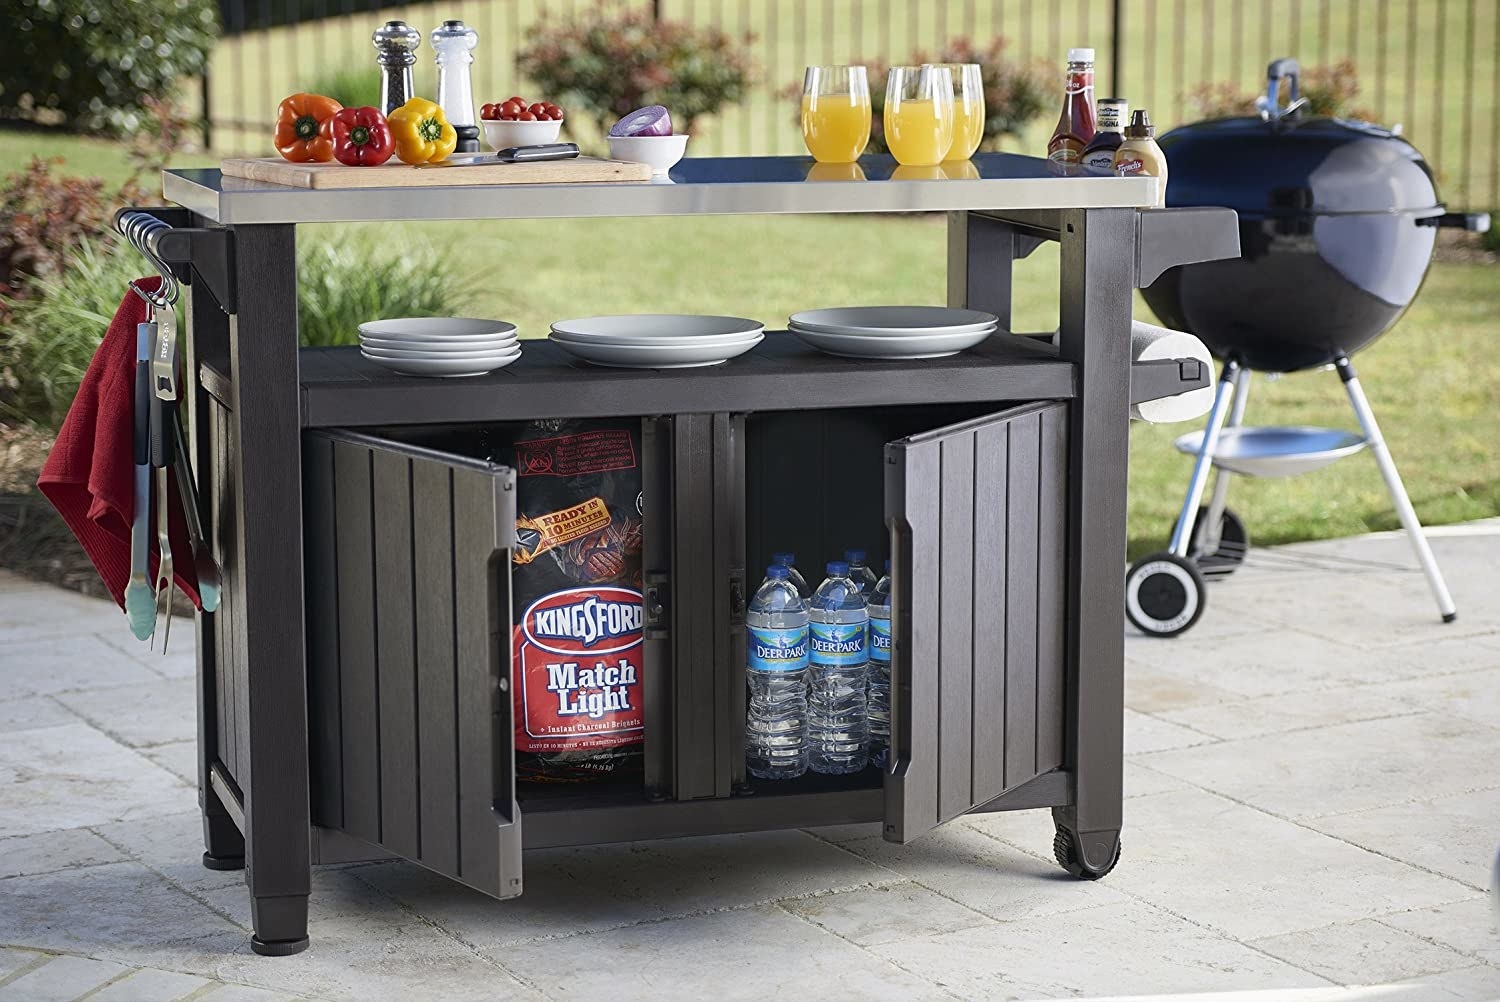 the unit with two plastic cabinet doors storing charcoal and water, a lower shelf stacked with plates, and a stainless countertop with a cutting board and drinks. On the side is a roll of paper towels, and the other holds grilling equipment